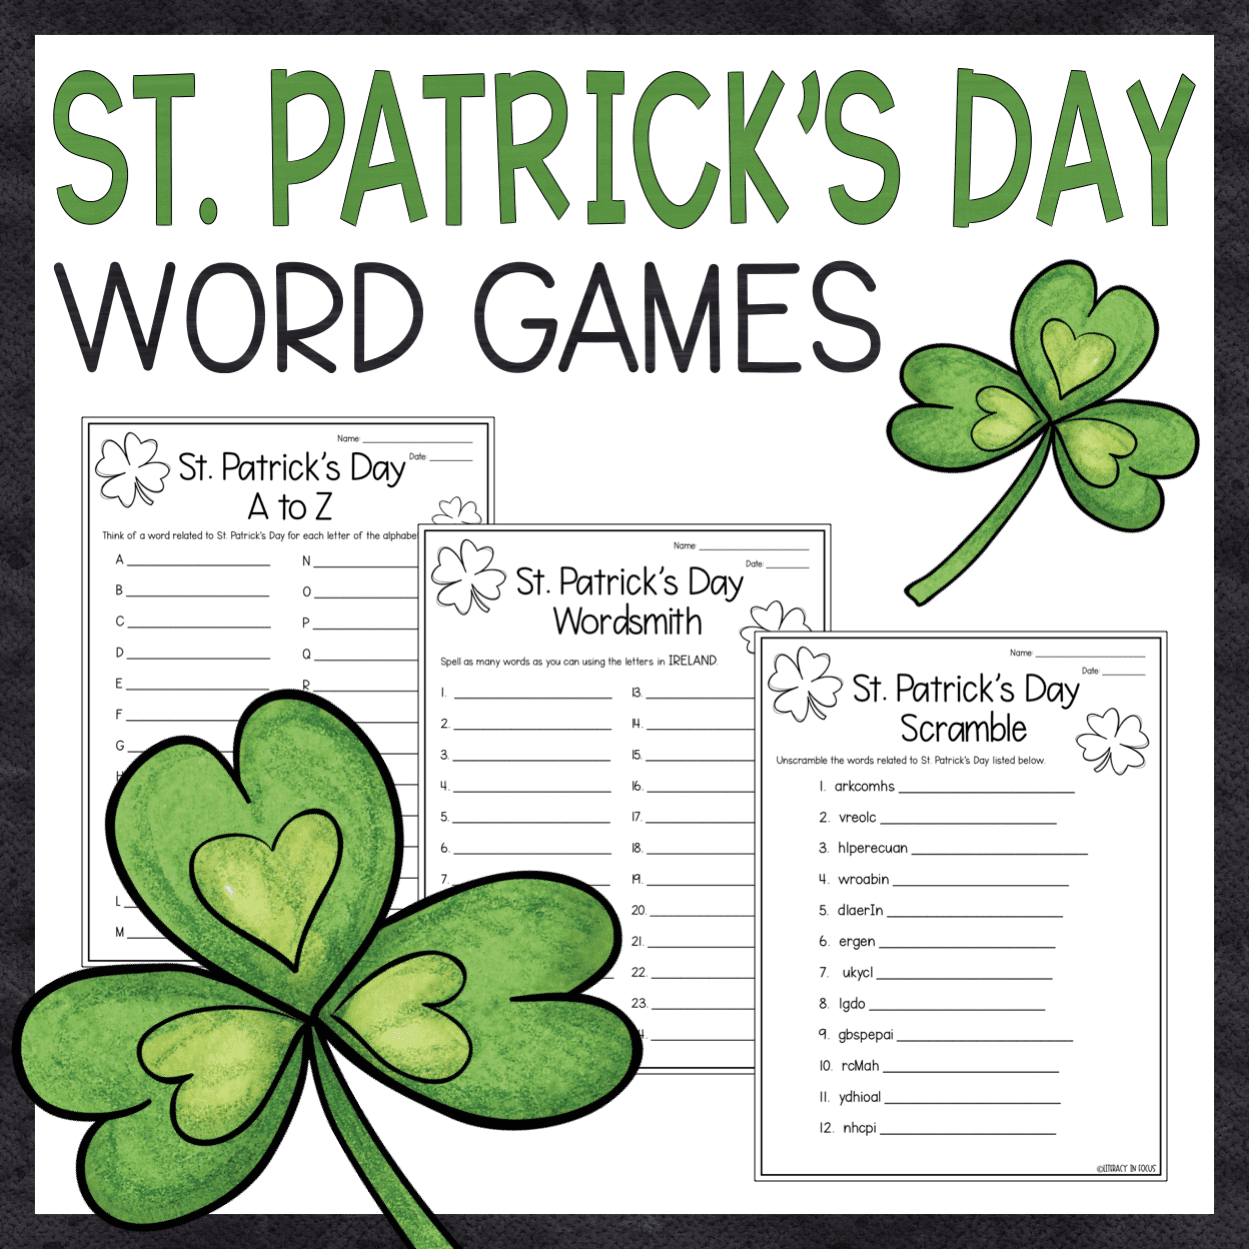 3 Printable Word Games for St. Patrick's Day Literacy in Focus A